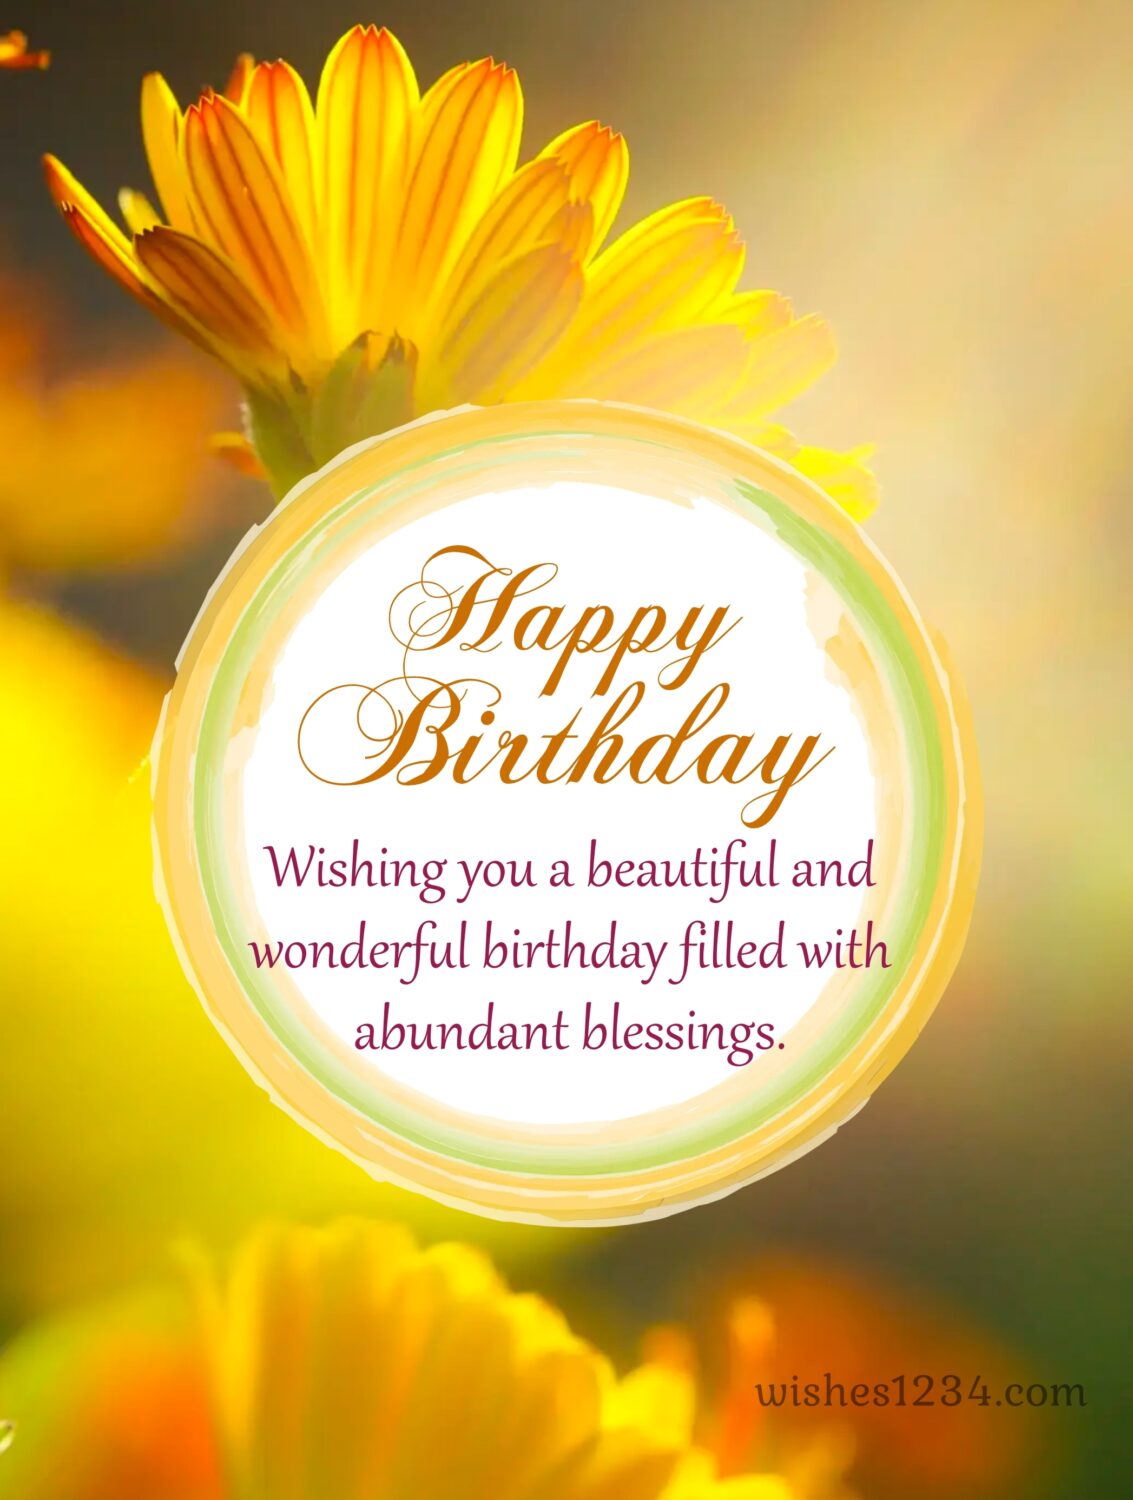 Birthday wishes on sunflower background, Happy Birthday wishes for Sister | Short Birthday wishes for Sister.